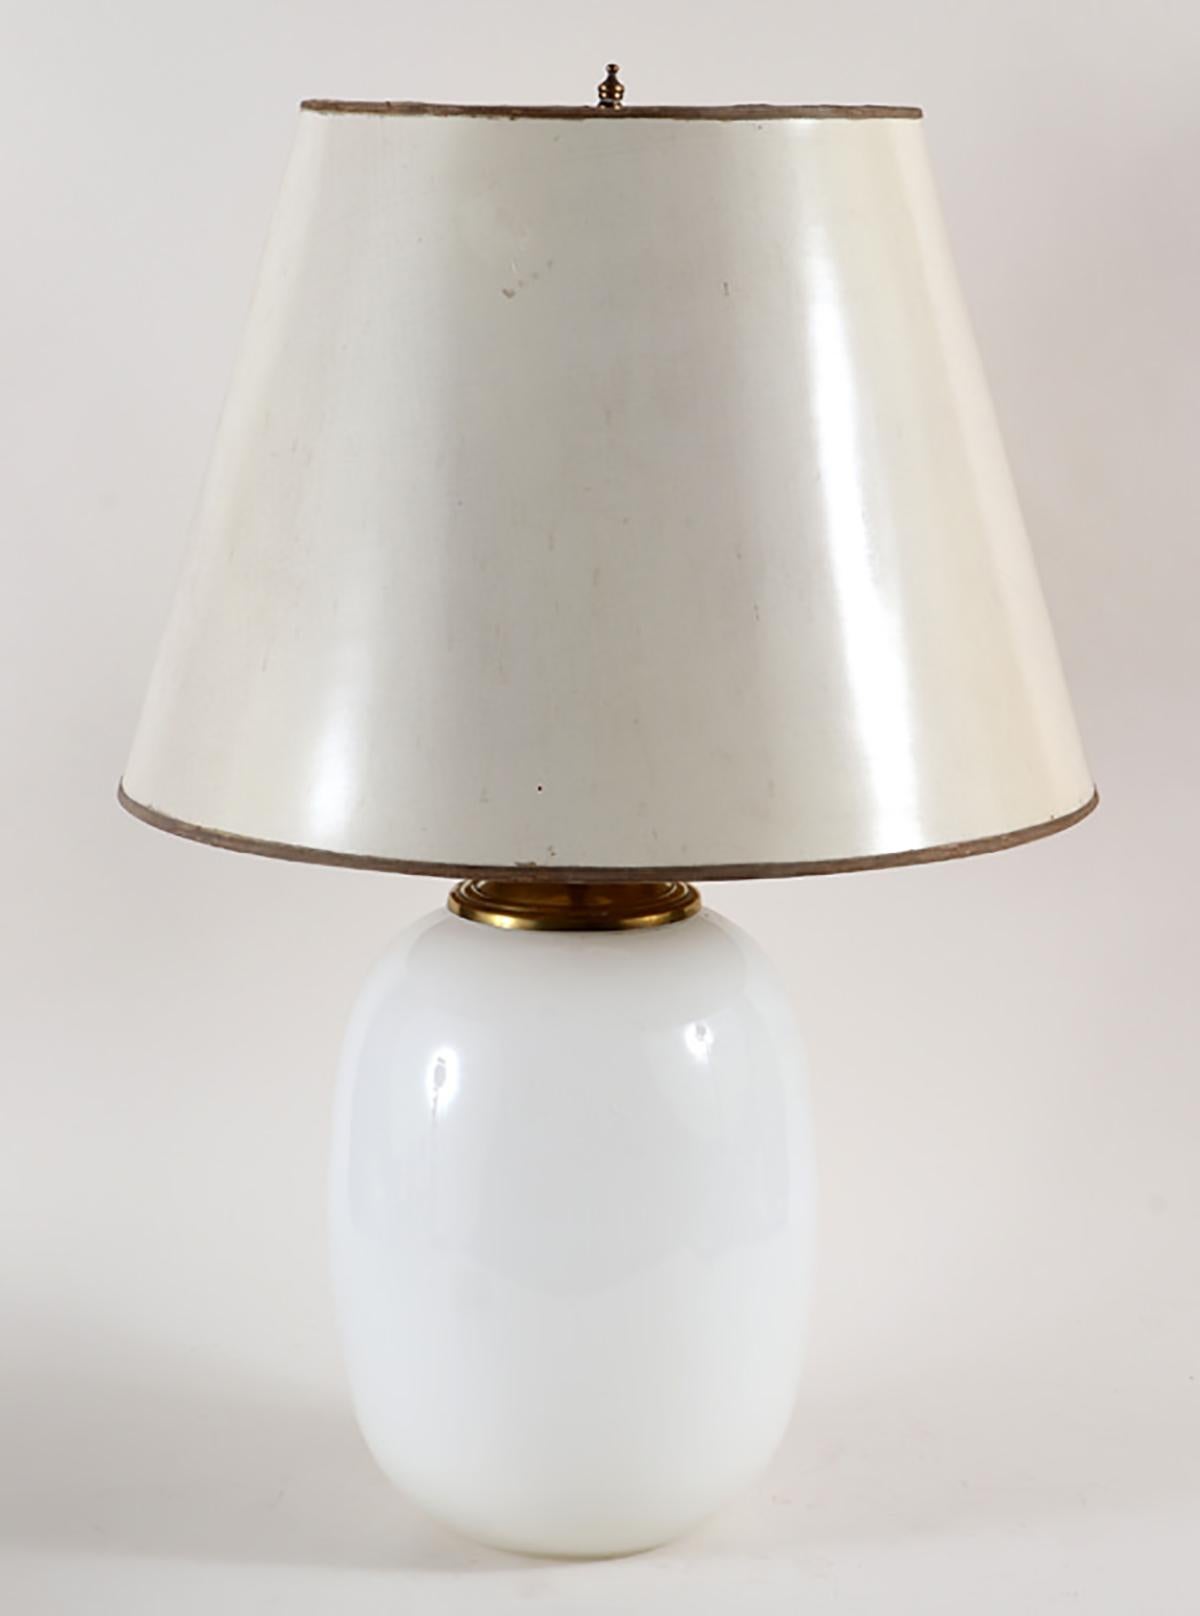 Pair of Mid-Century Modern French opaline glass lamps.